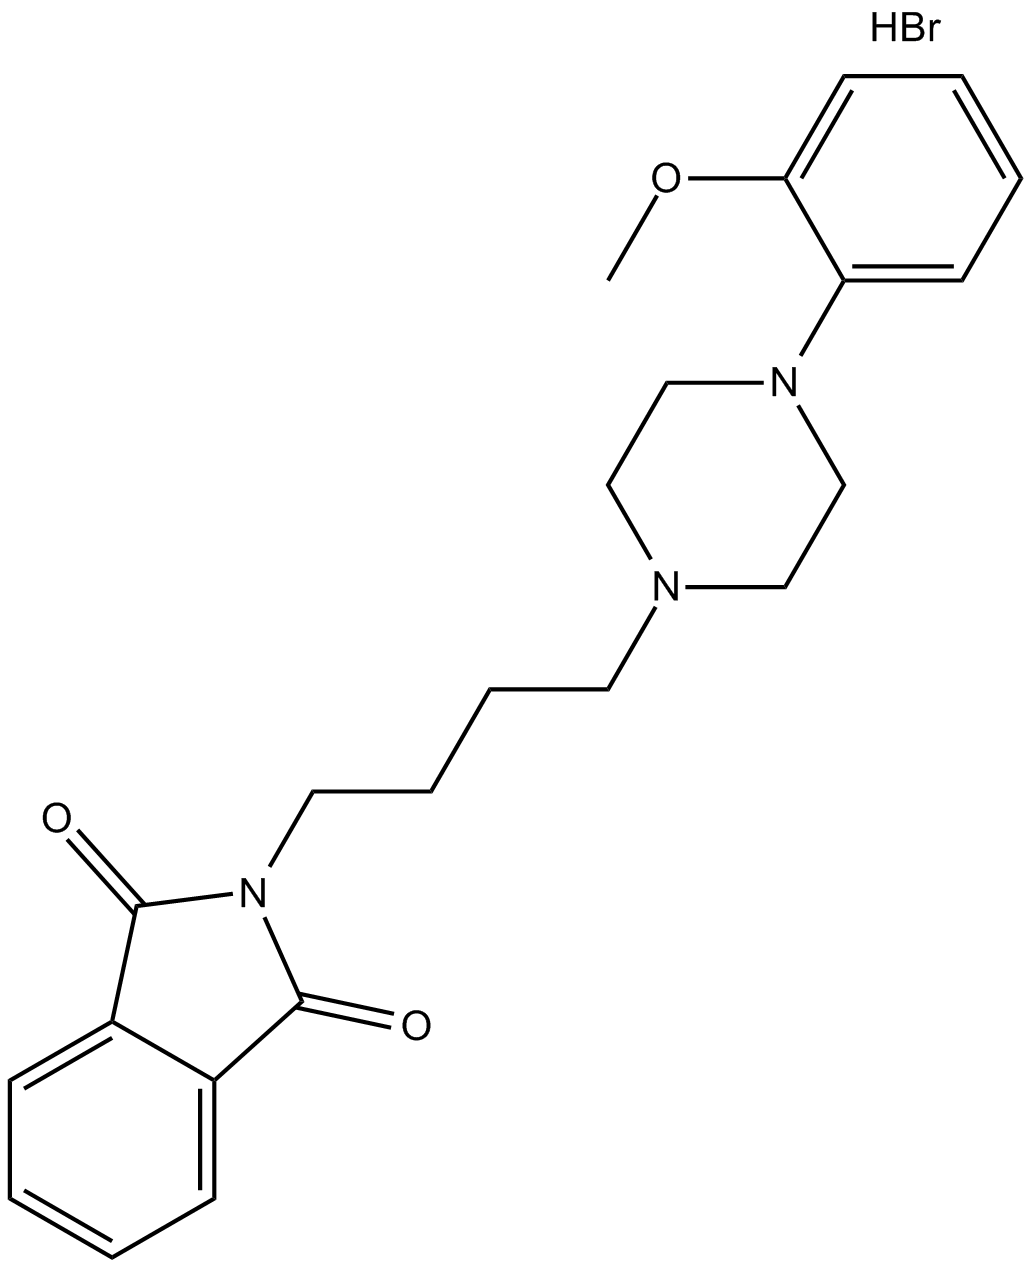 NAN-190 hydrobromide  Chemical Structure